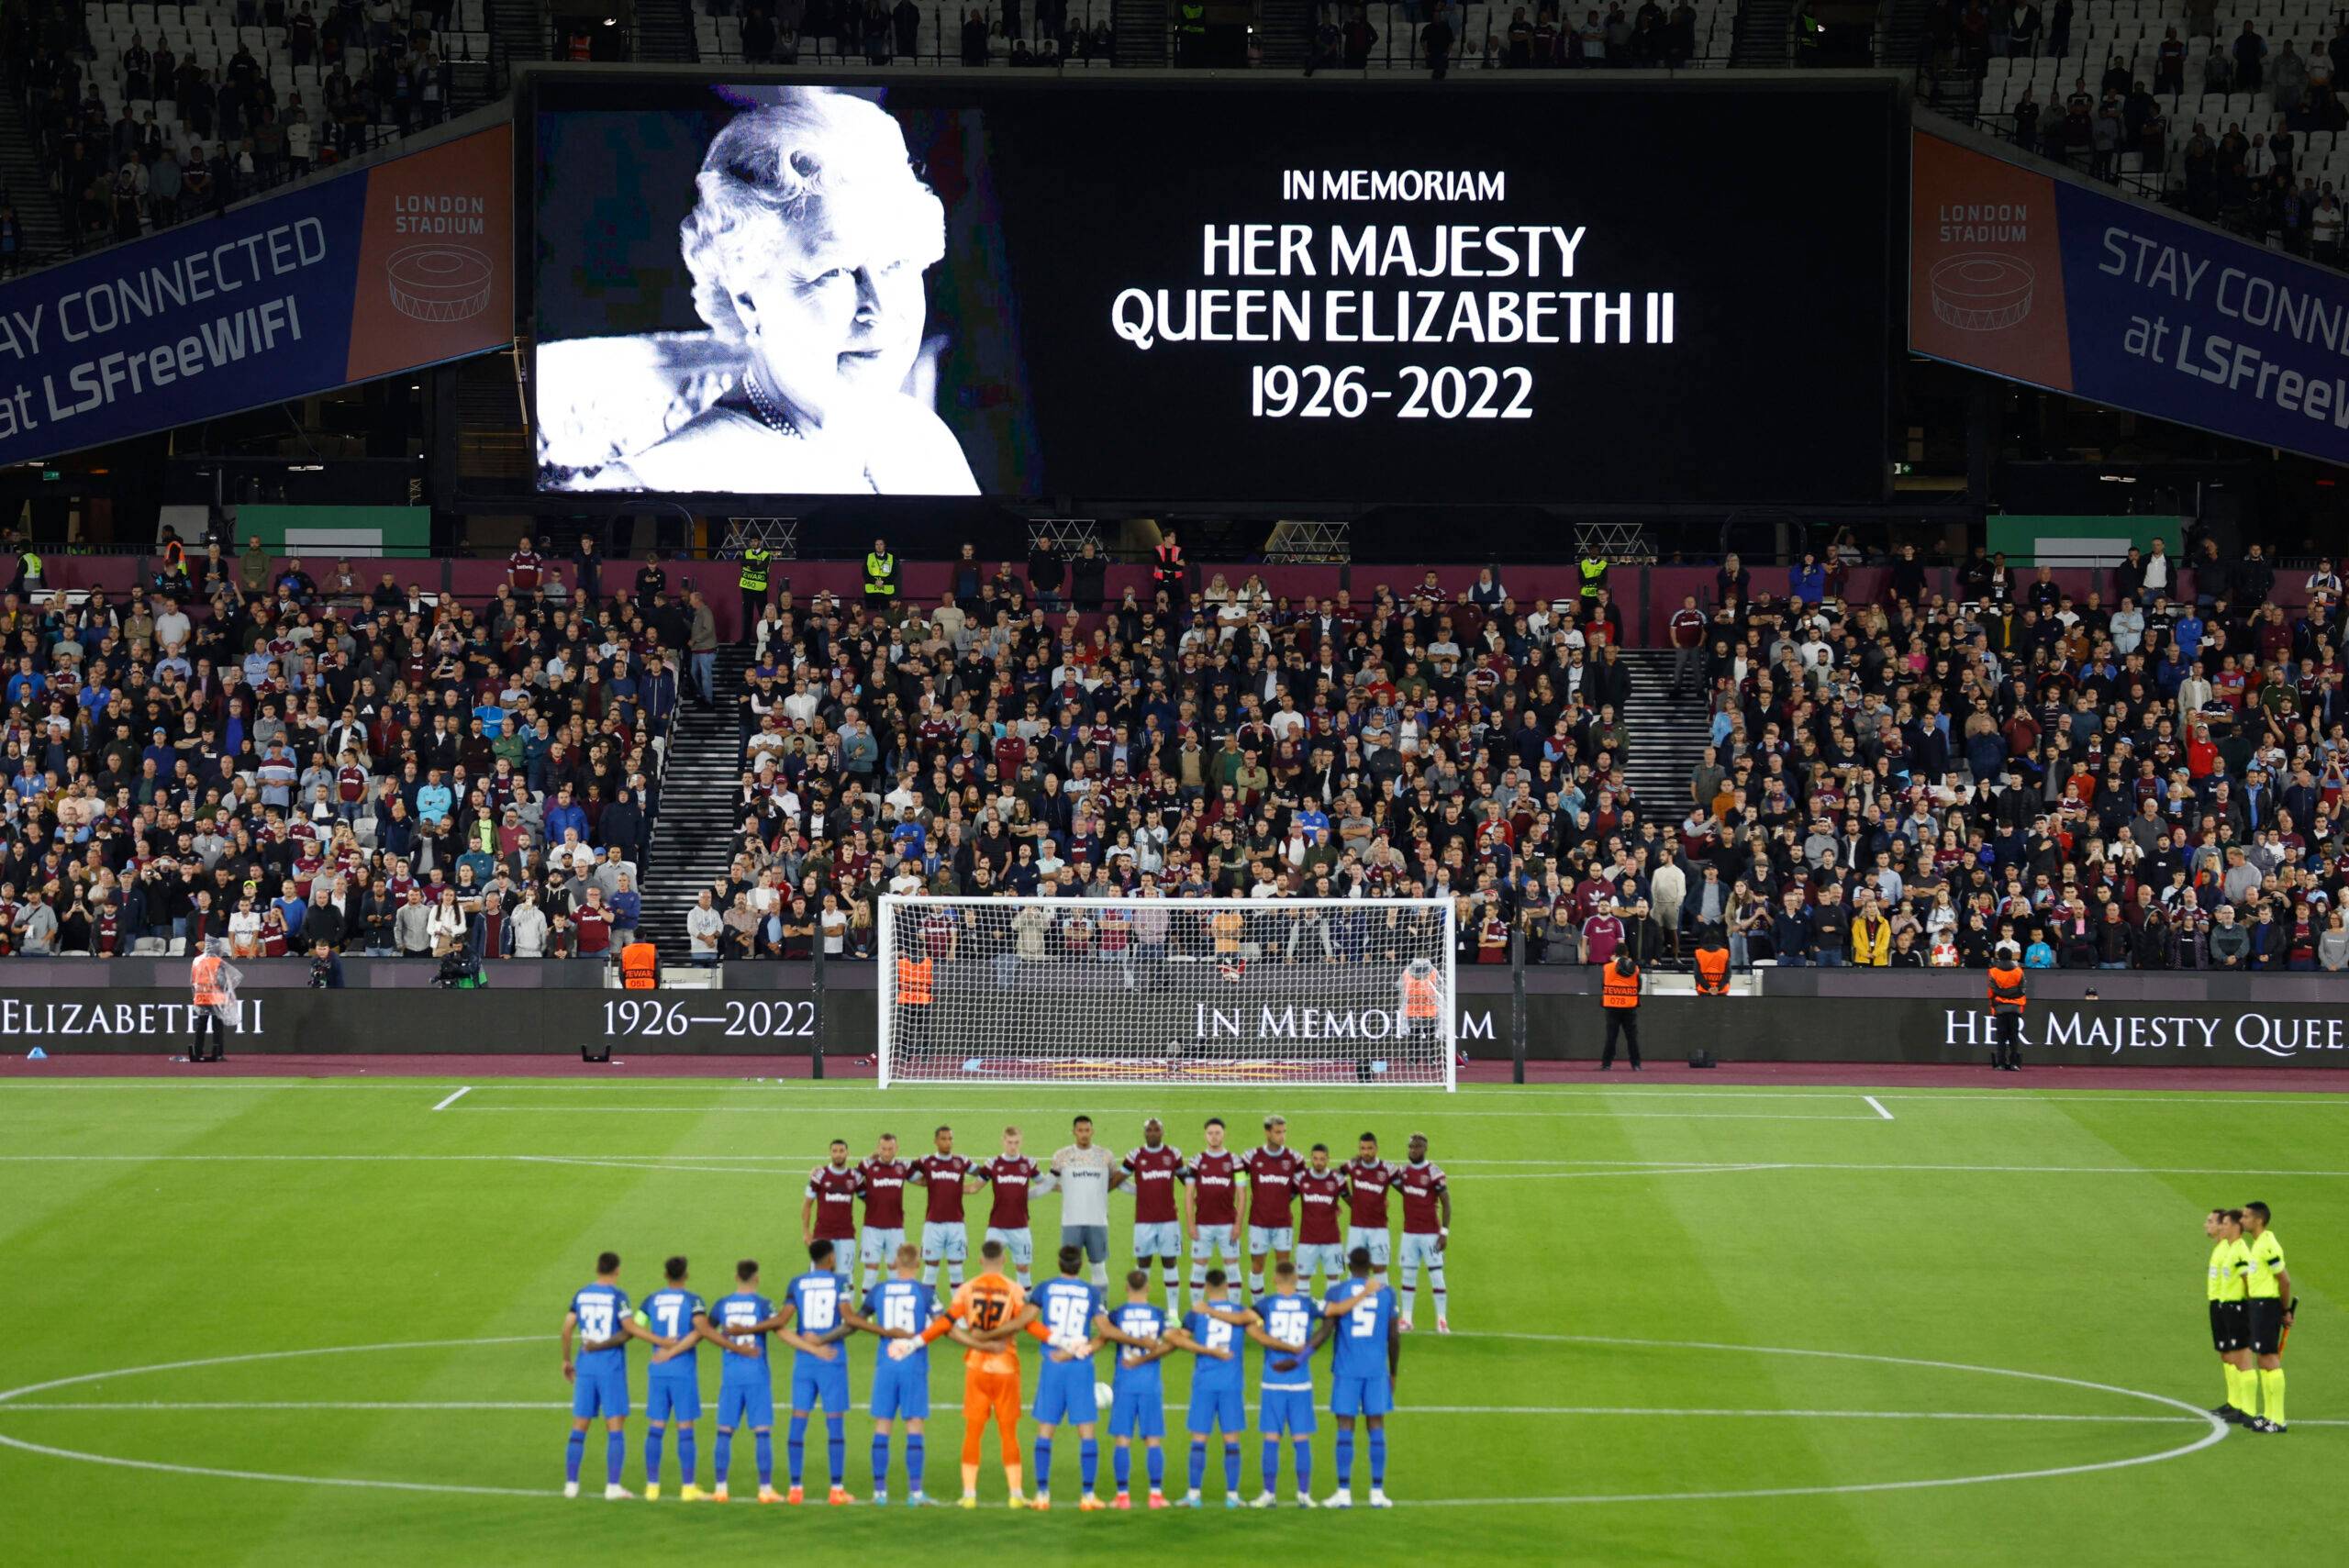 West Ham and FCSB pay tribute to Queen Elizabeth II before their match